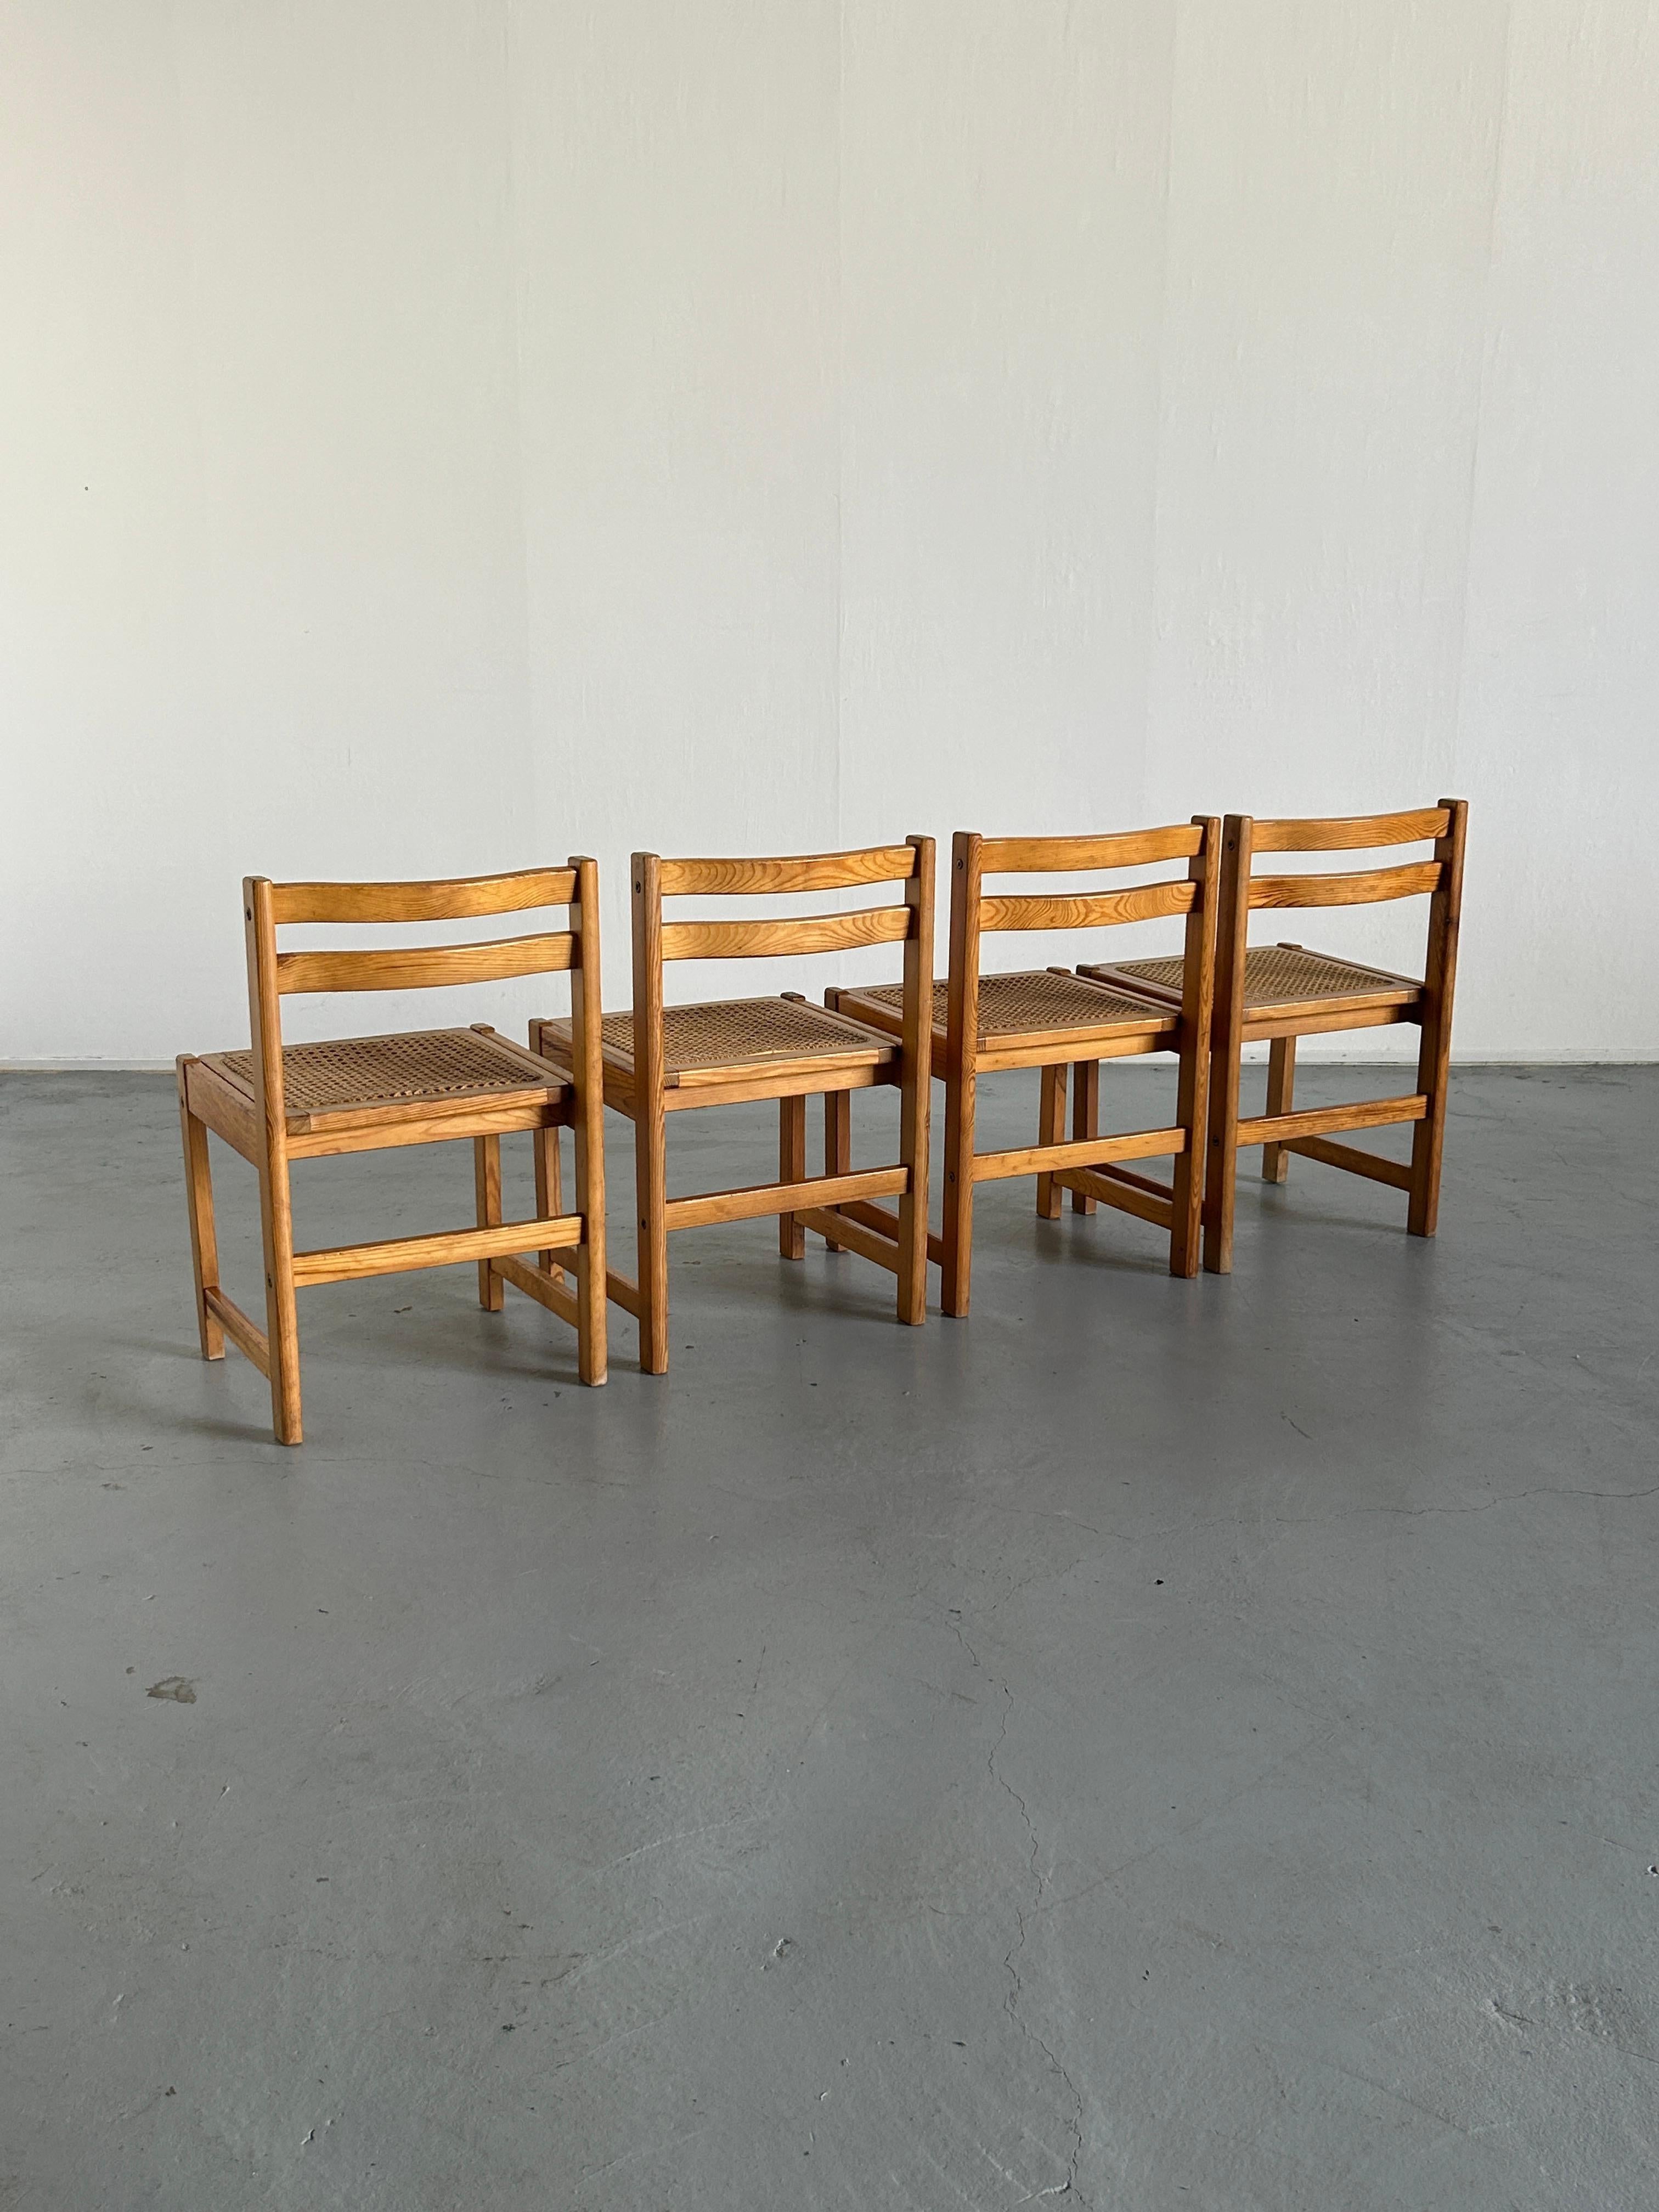 Set of 4 Vintage Mid-Century Modern Wooden Dining Chairs in Beech and Cane, 60s 3